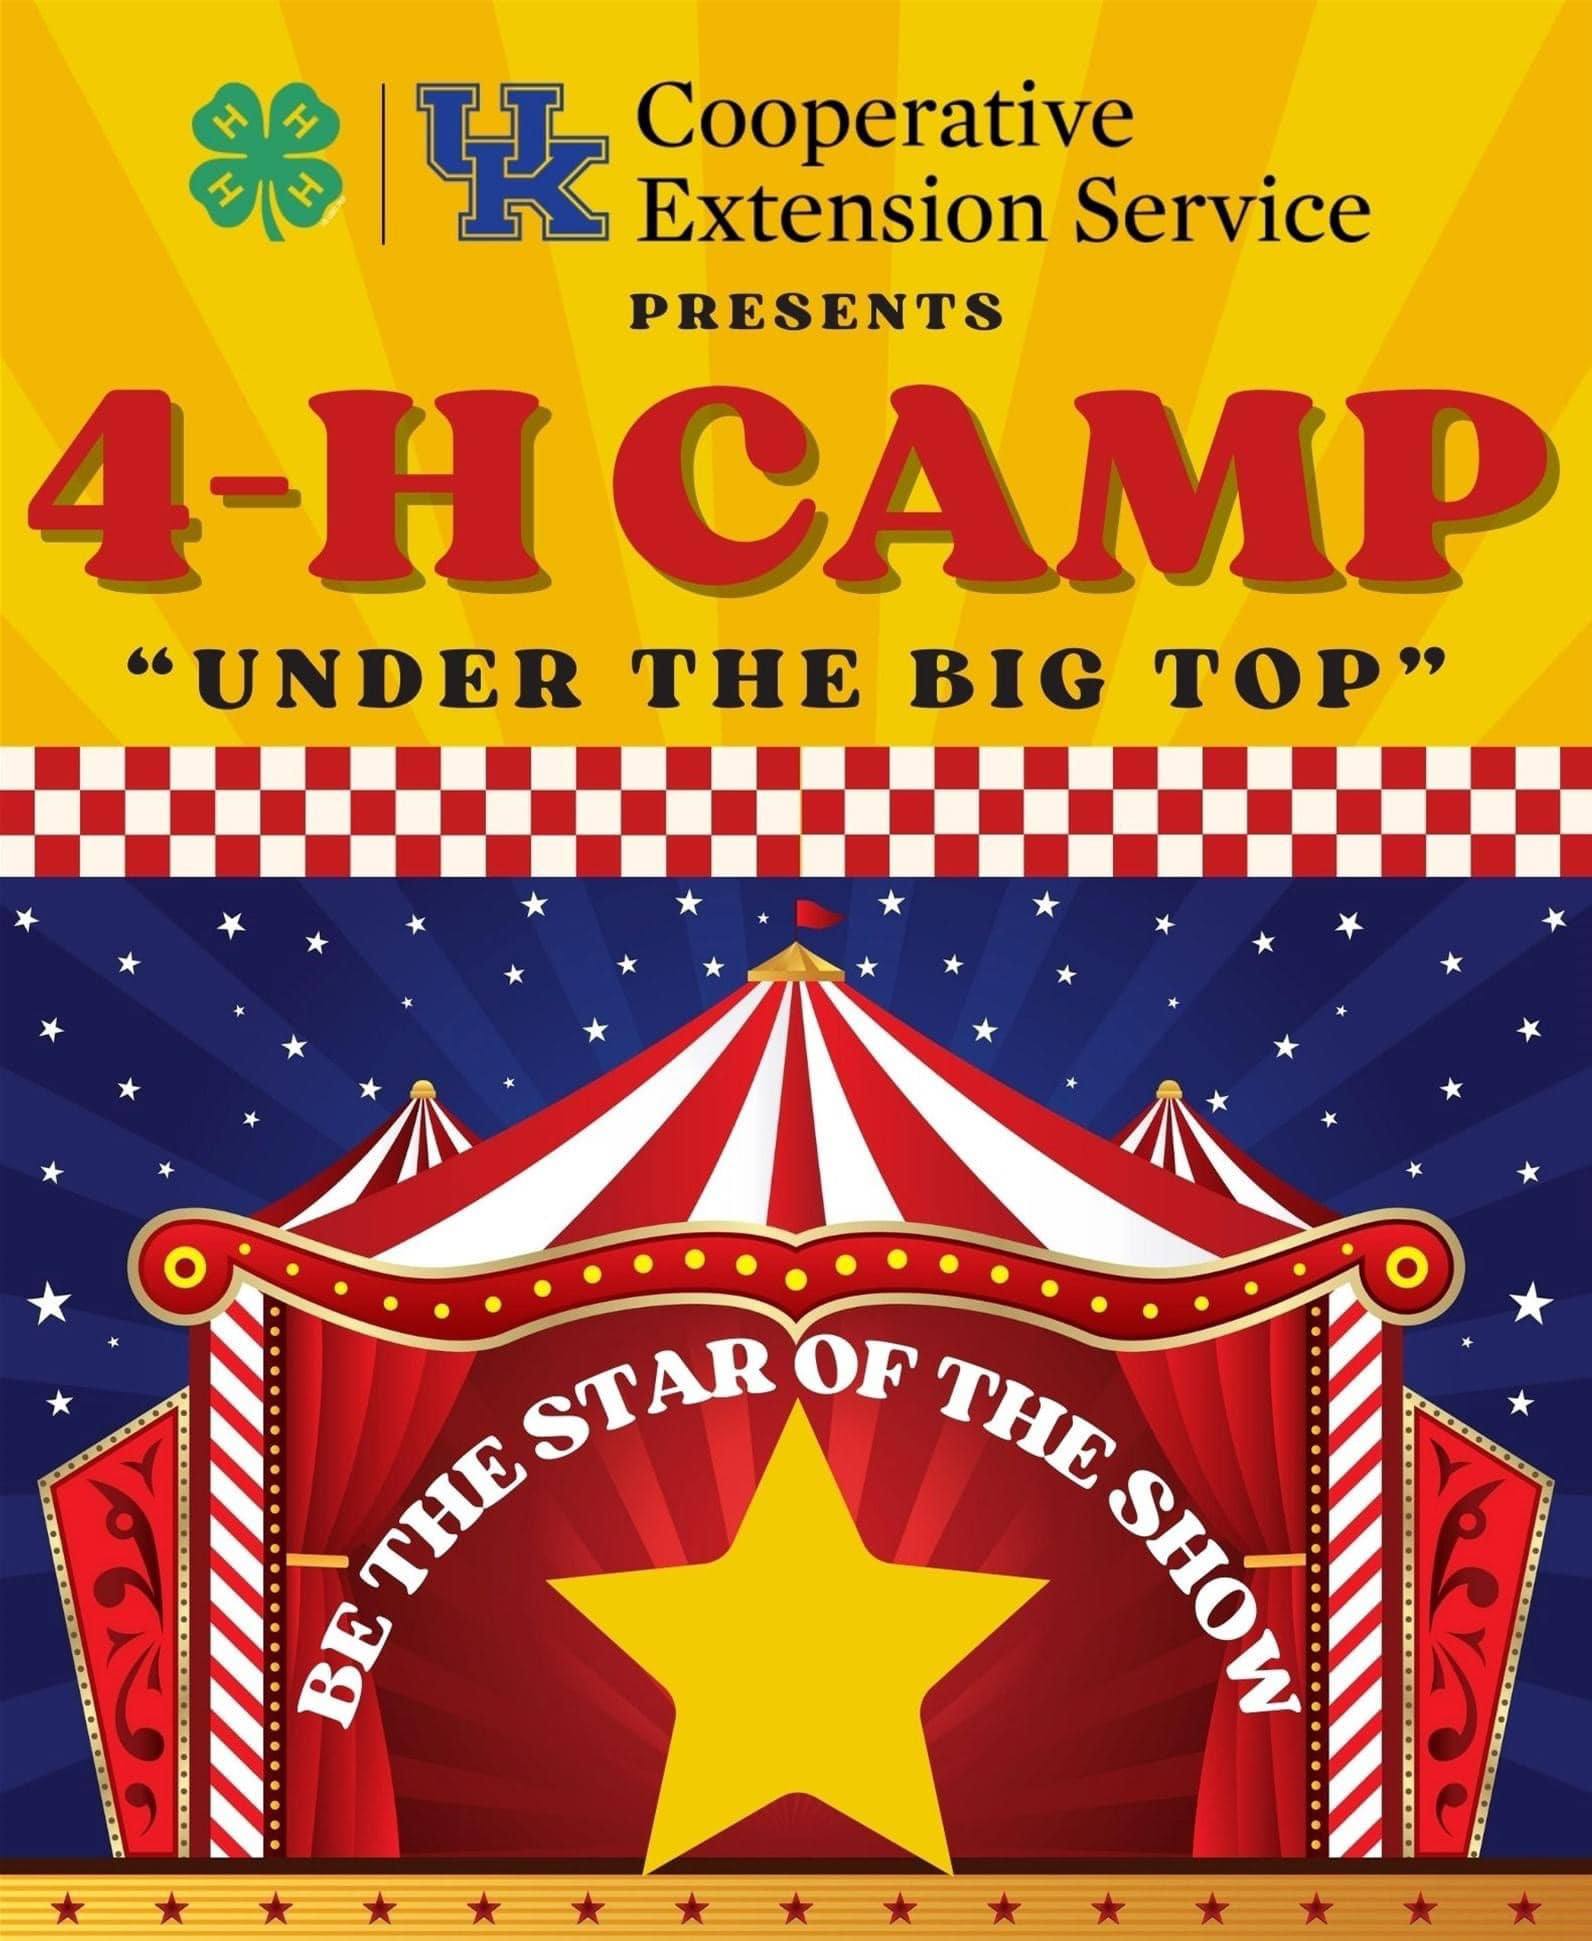 4-H Camp Under the Big Top